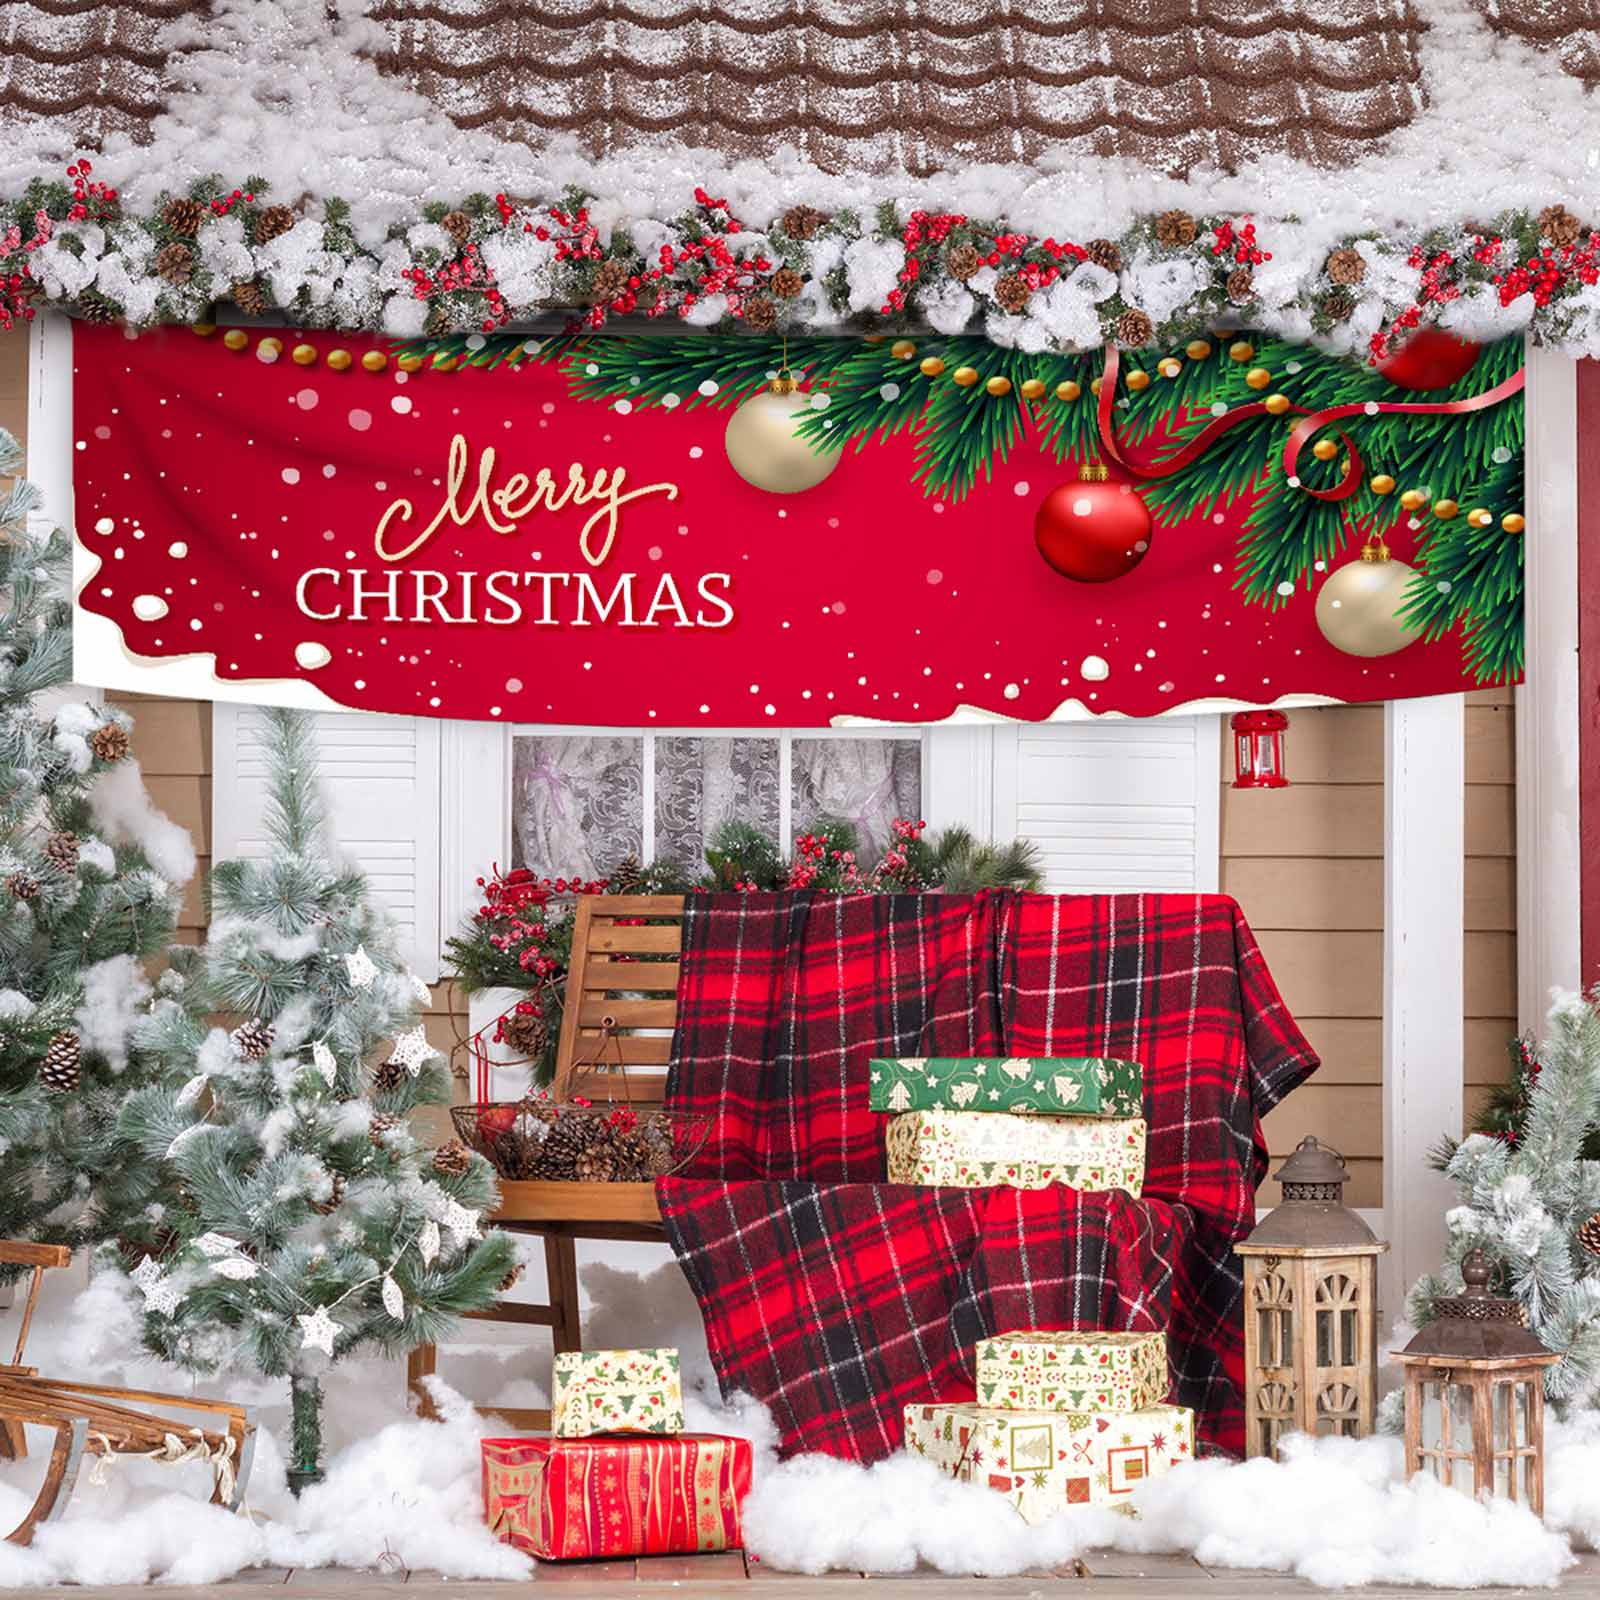 Details about   2021 Merry Christmas Top Door Decoration Banner Happy New Year 2021 